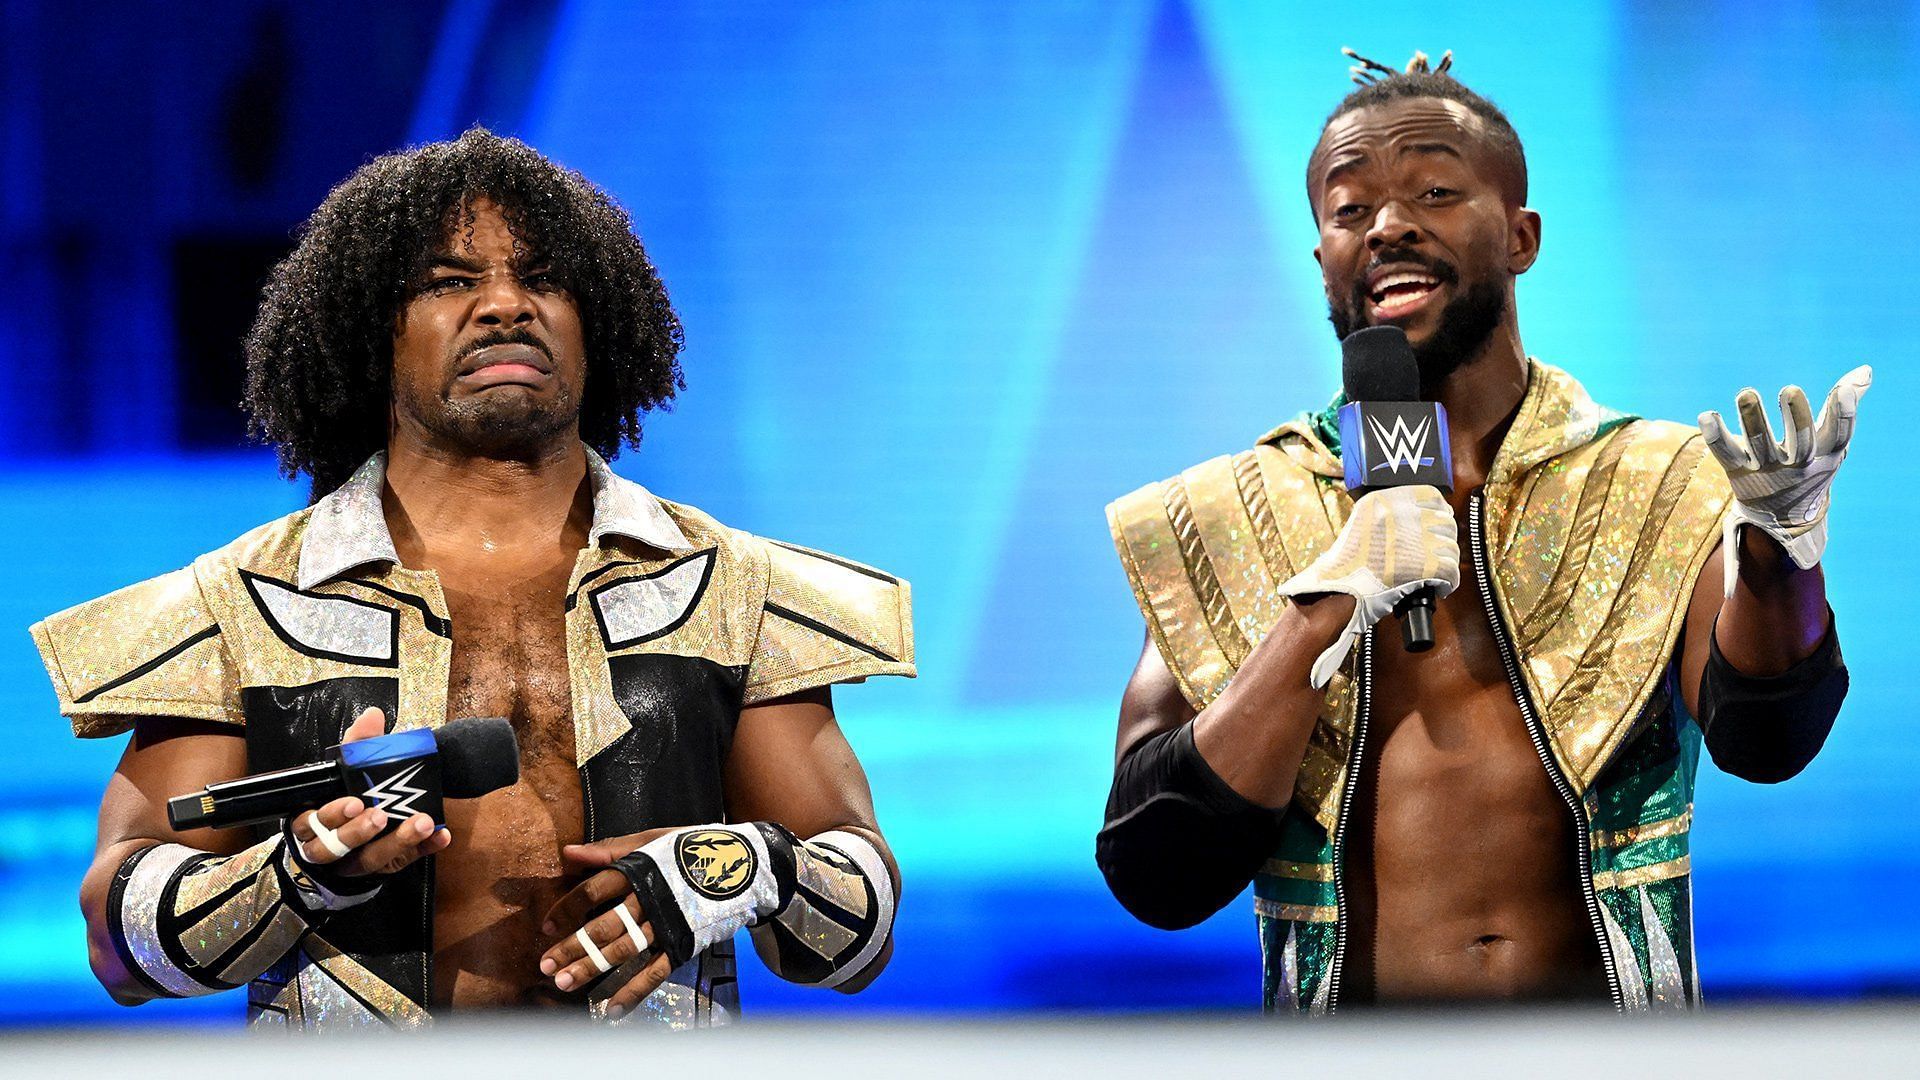 The New Day on SmackDown